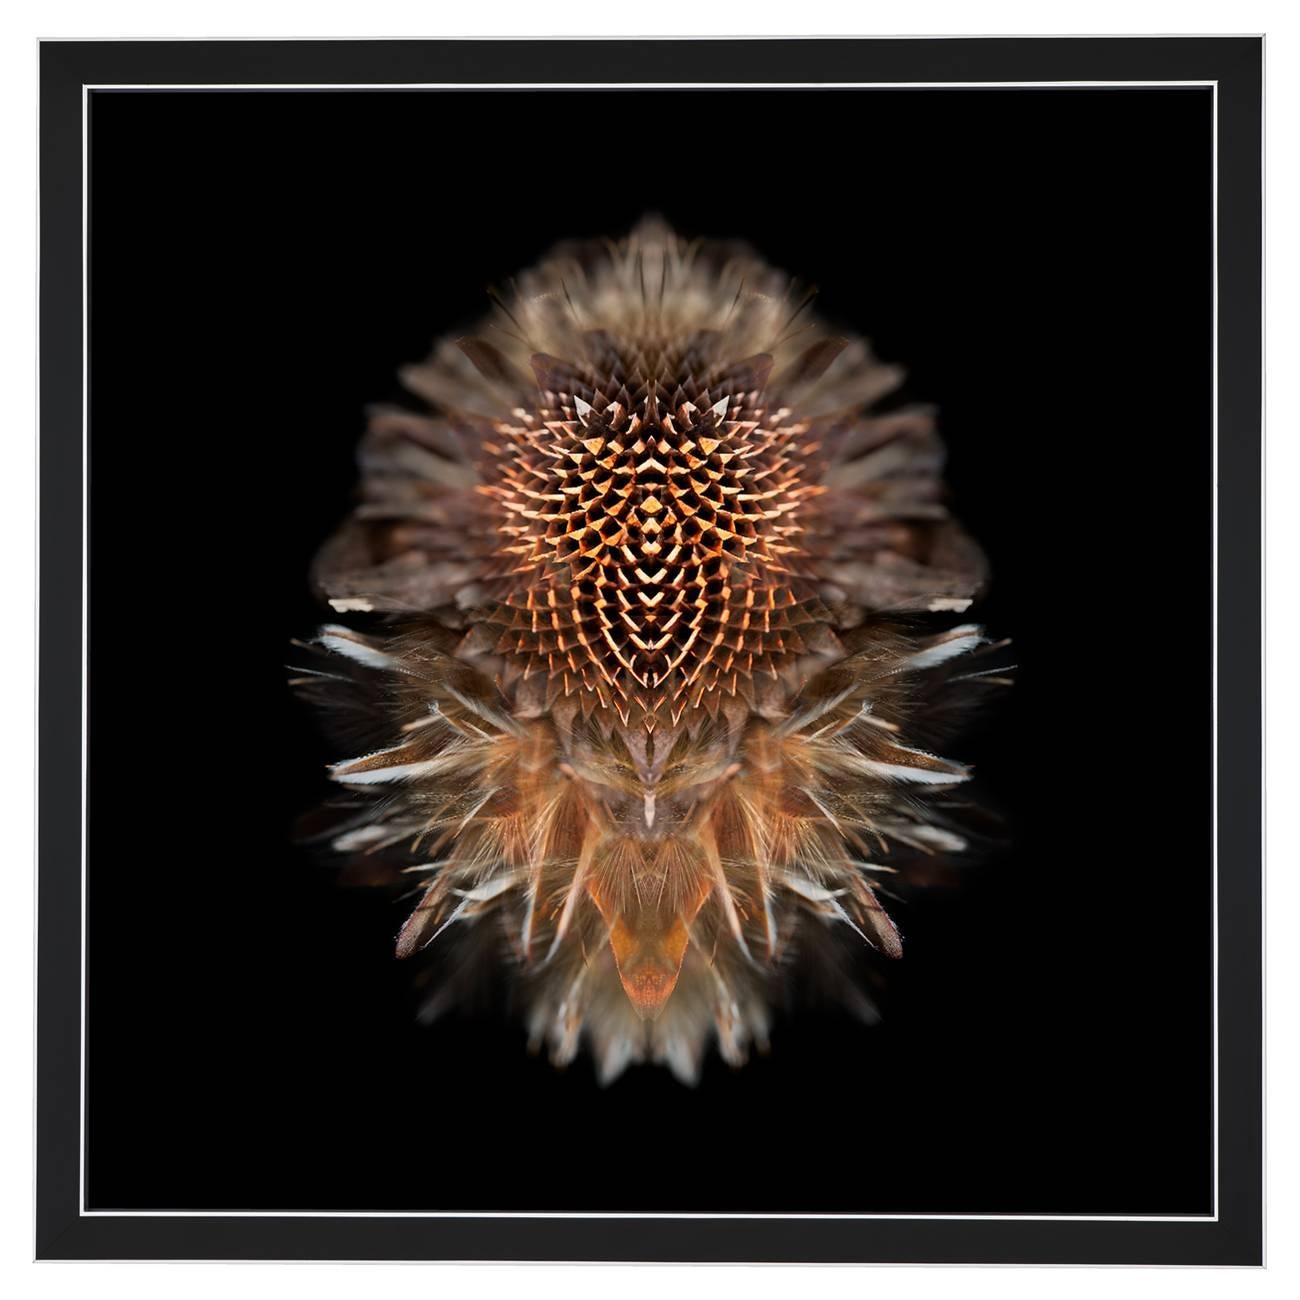 Composition: 
King Protea seedbed (after fire), Leucadendron Rubrum, Eagle Owl Feather

Limited edition. Each image is uniquely printed directly to 5mm acrylic glass using UV cured pigment inks giving each photograph real depth and clarity. Every